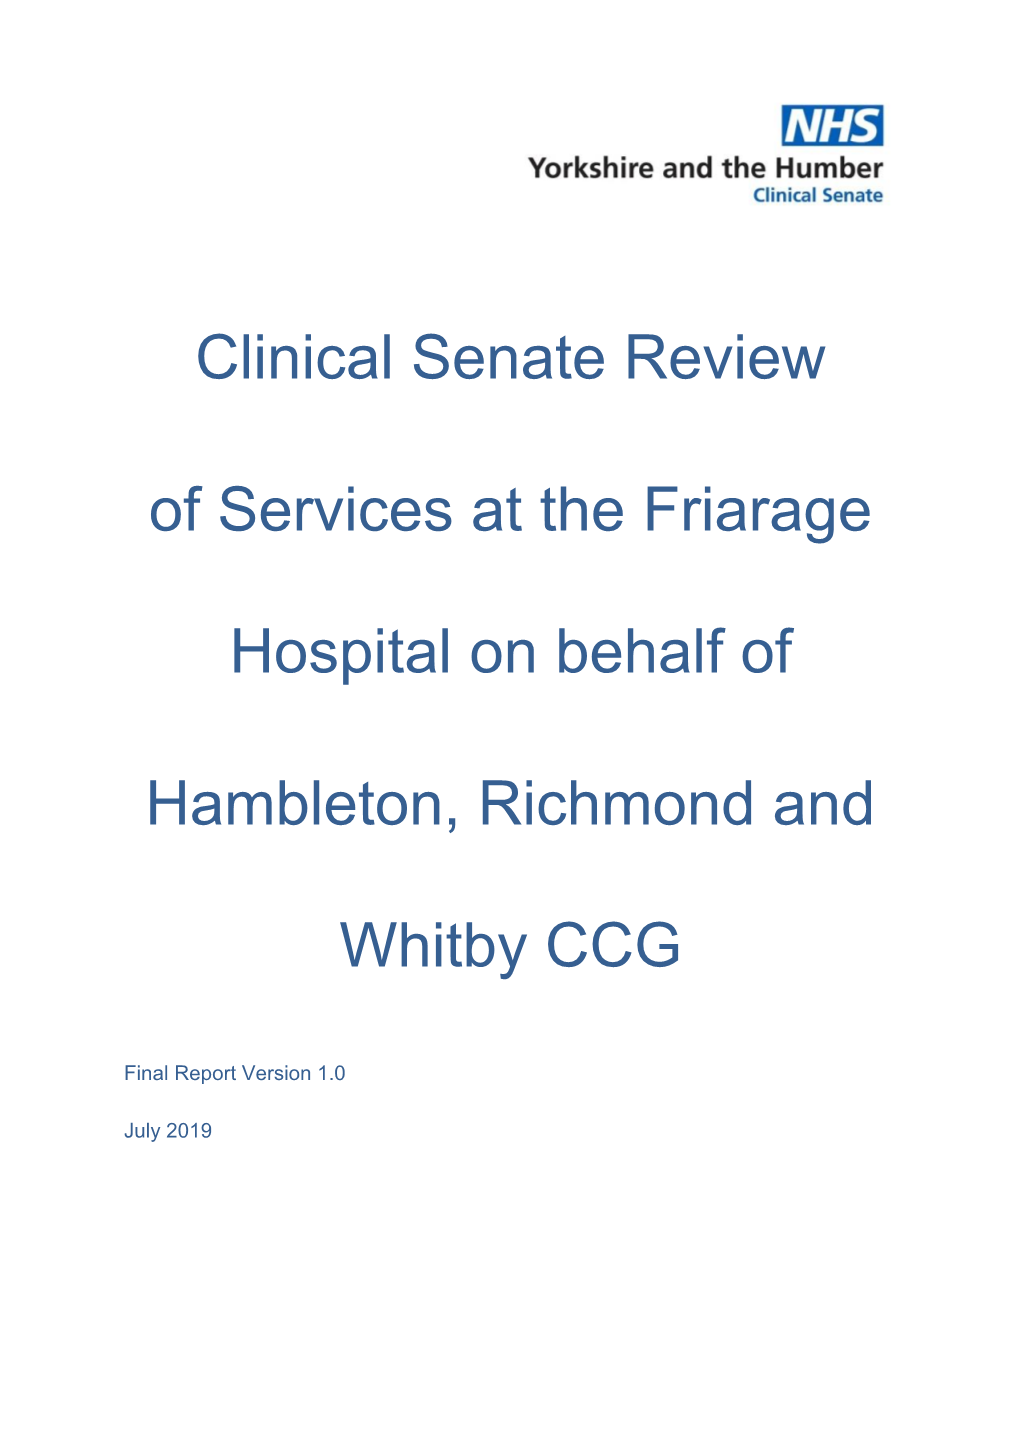 Clinical Senate Review of Services at the Friarage Hospital on Behalf Of